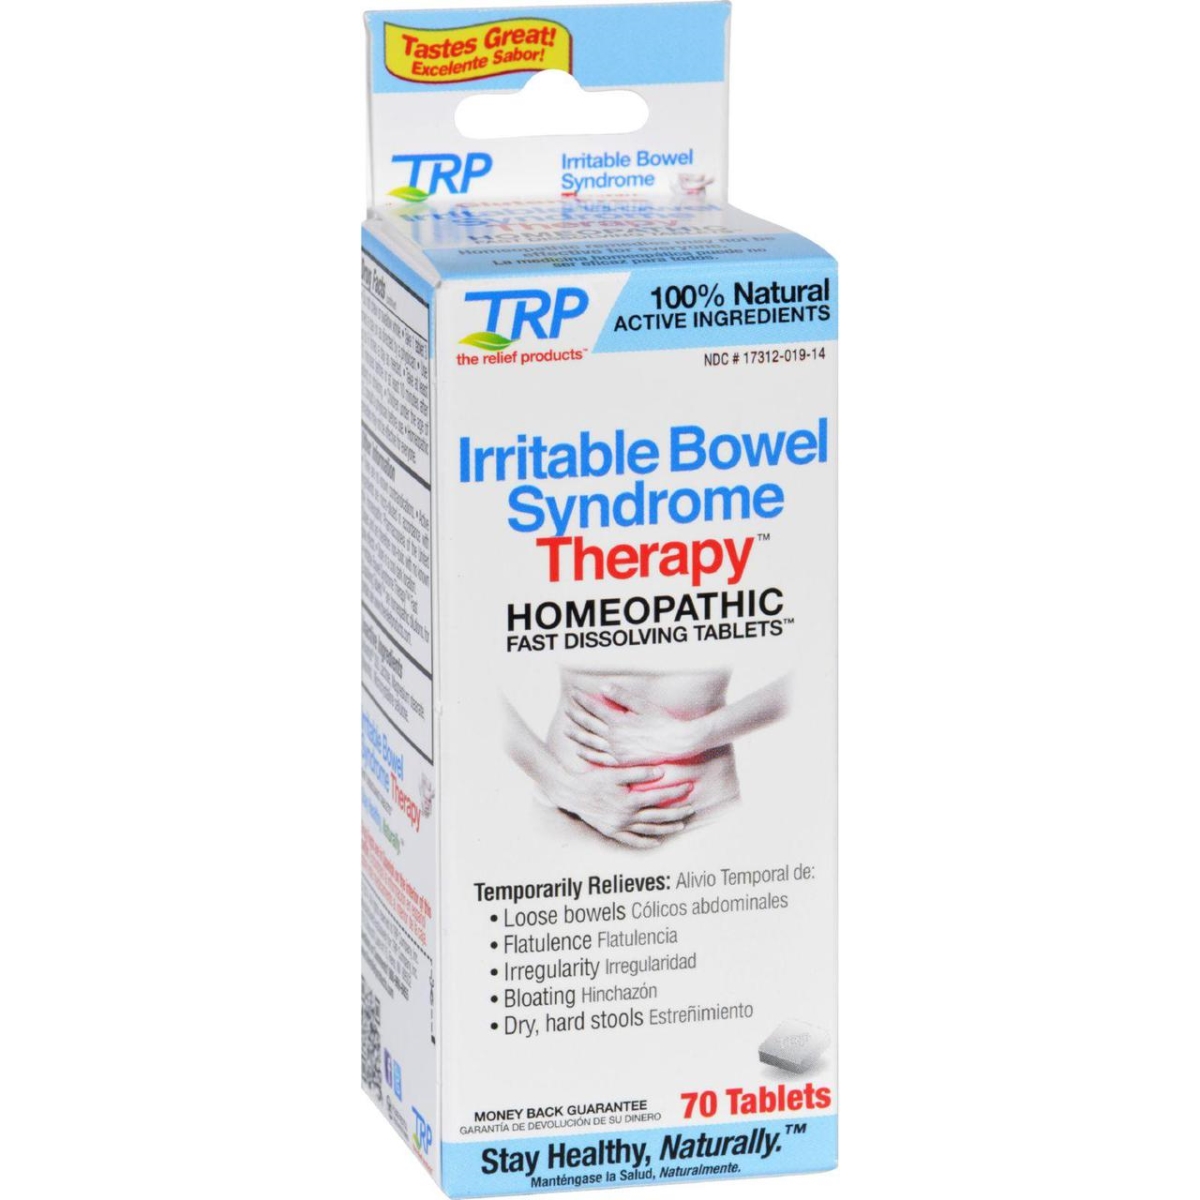 Hg1225838 Irritable Bowel Syndrome Therapy - 70 Capsules